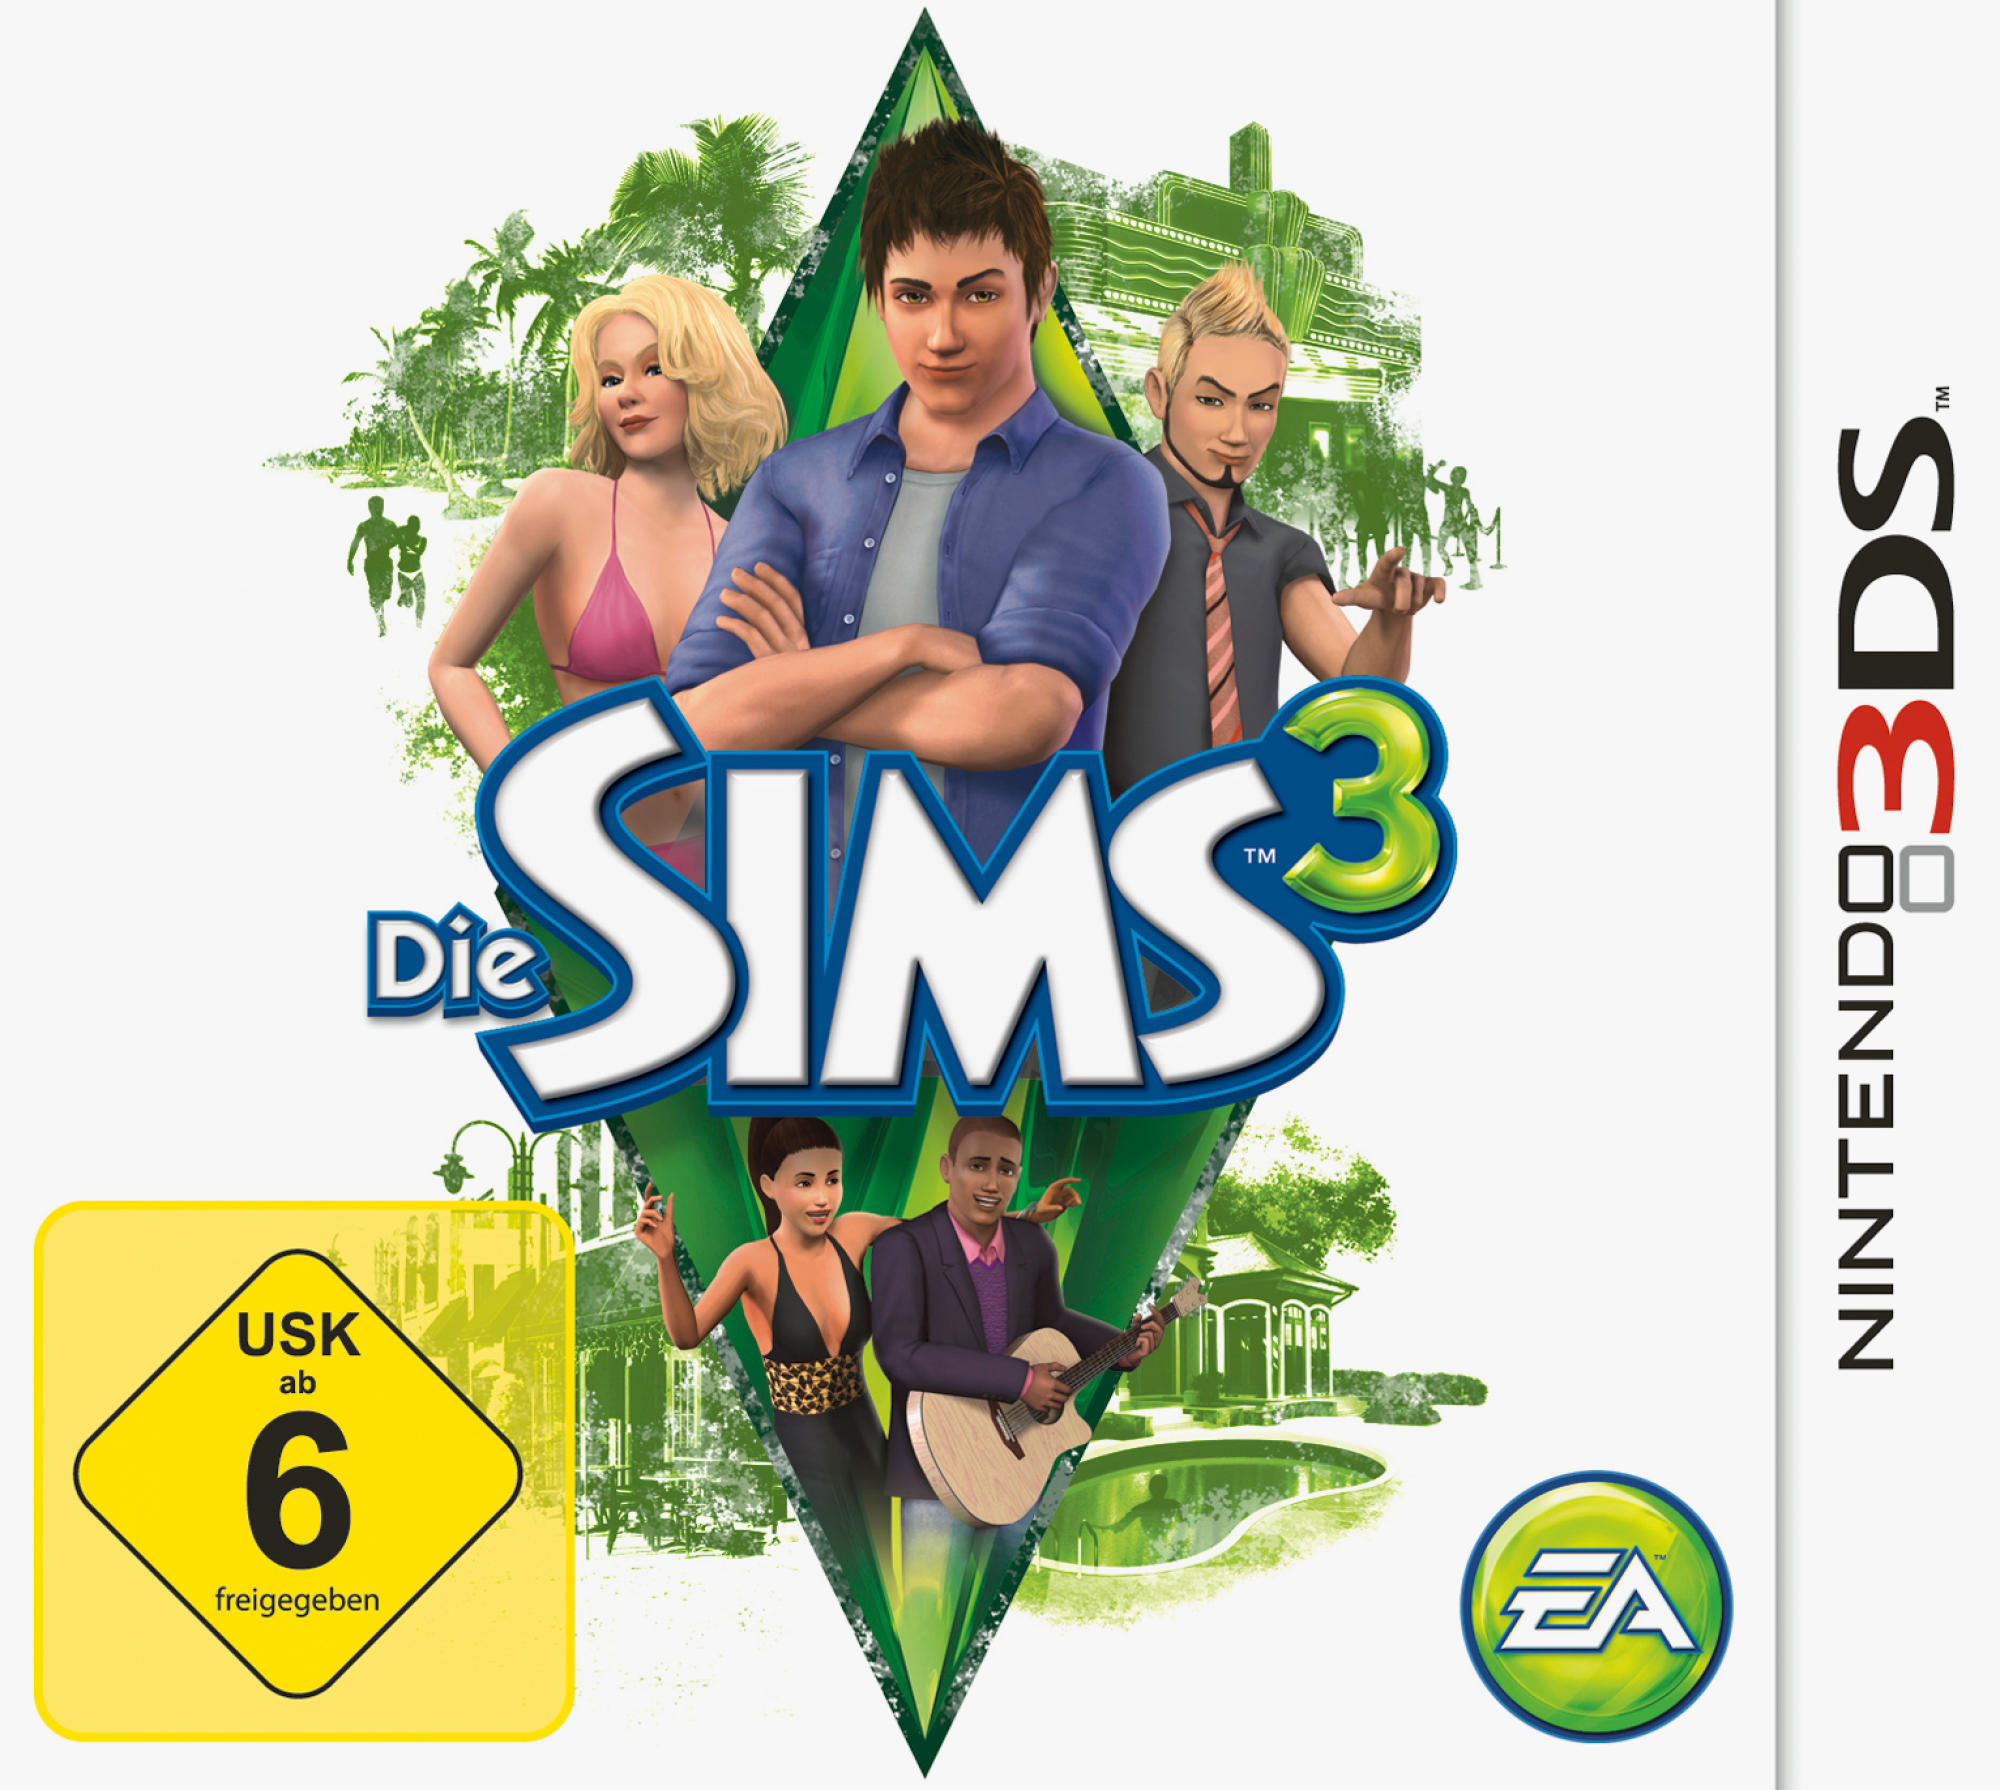 Die Sims 3DS] [Nintendo Pyramide) 3 (Software 